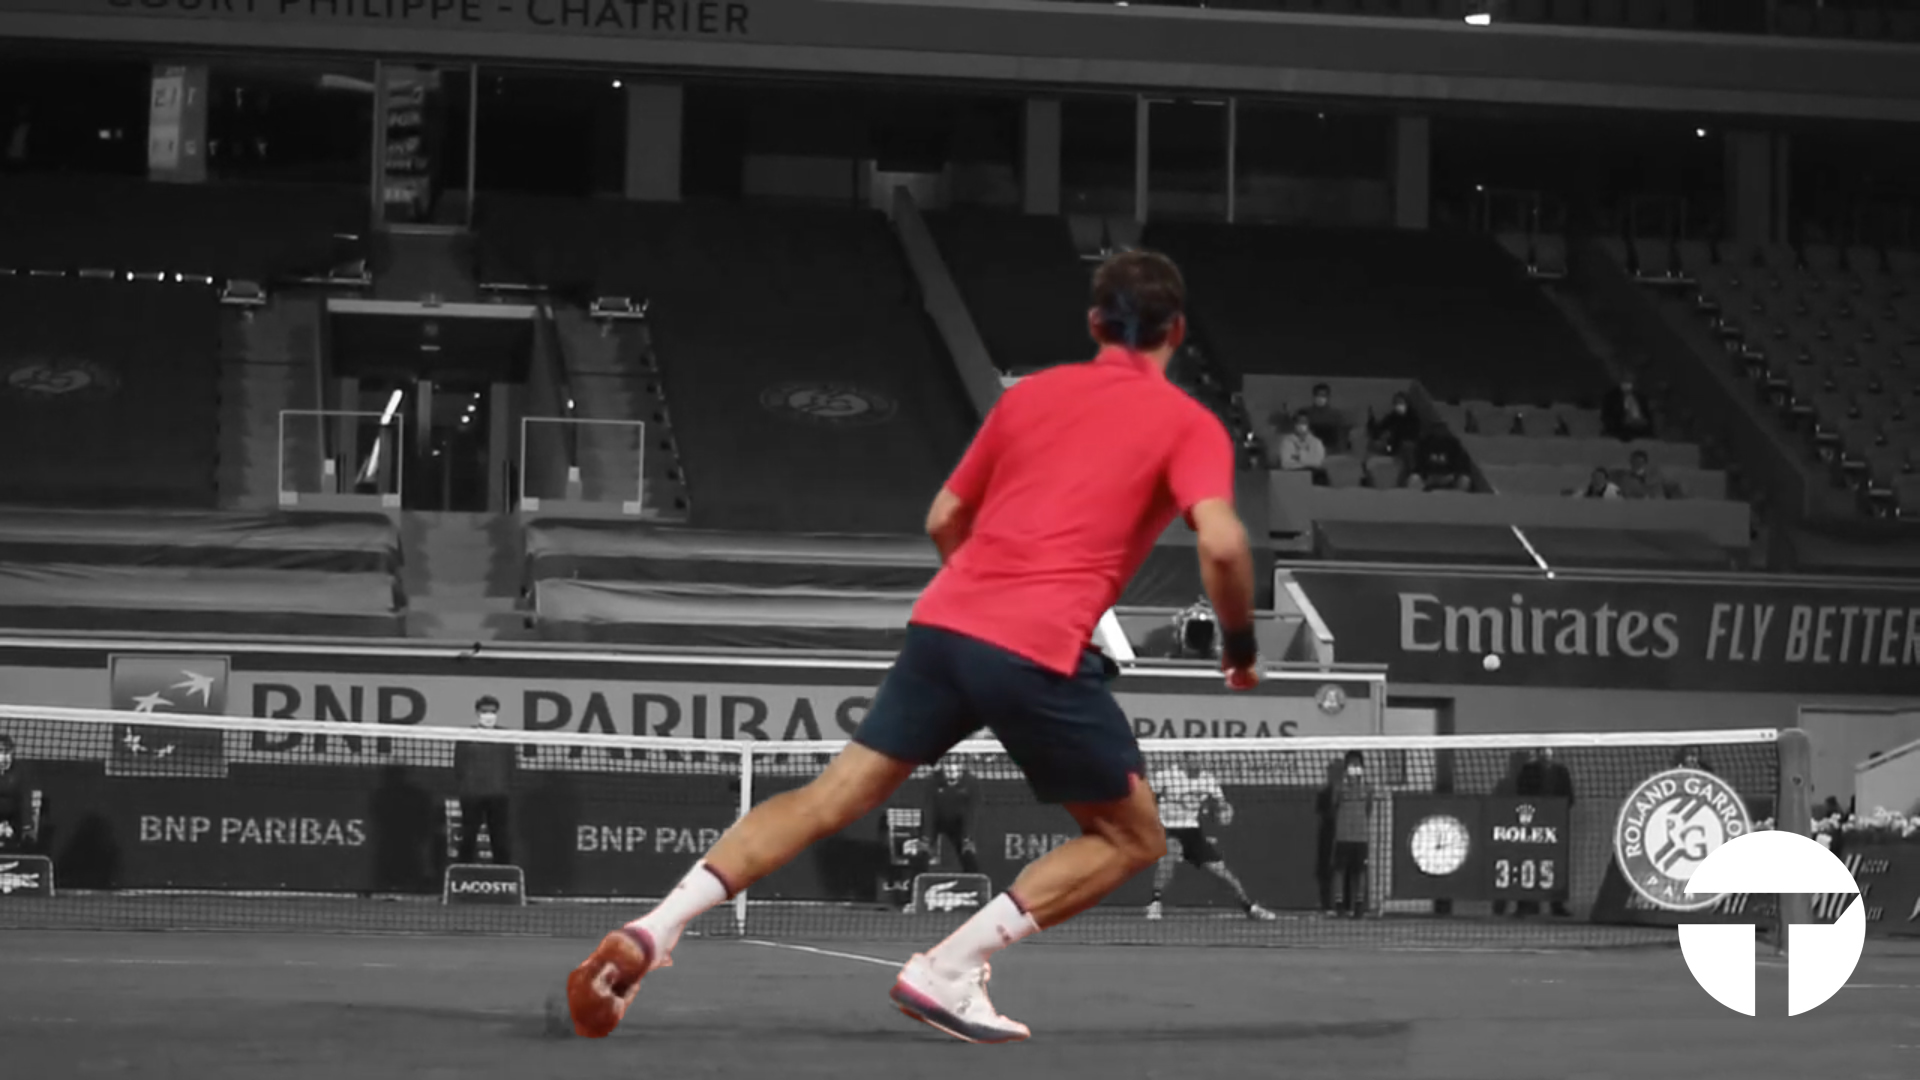 Federer's first step uses balance to help directionality